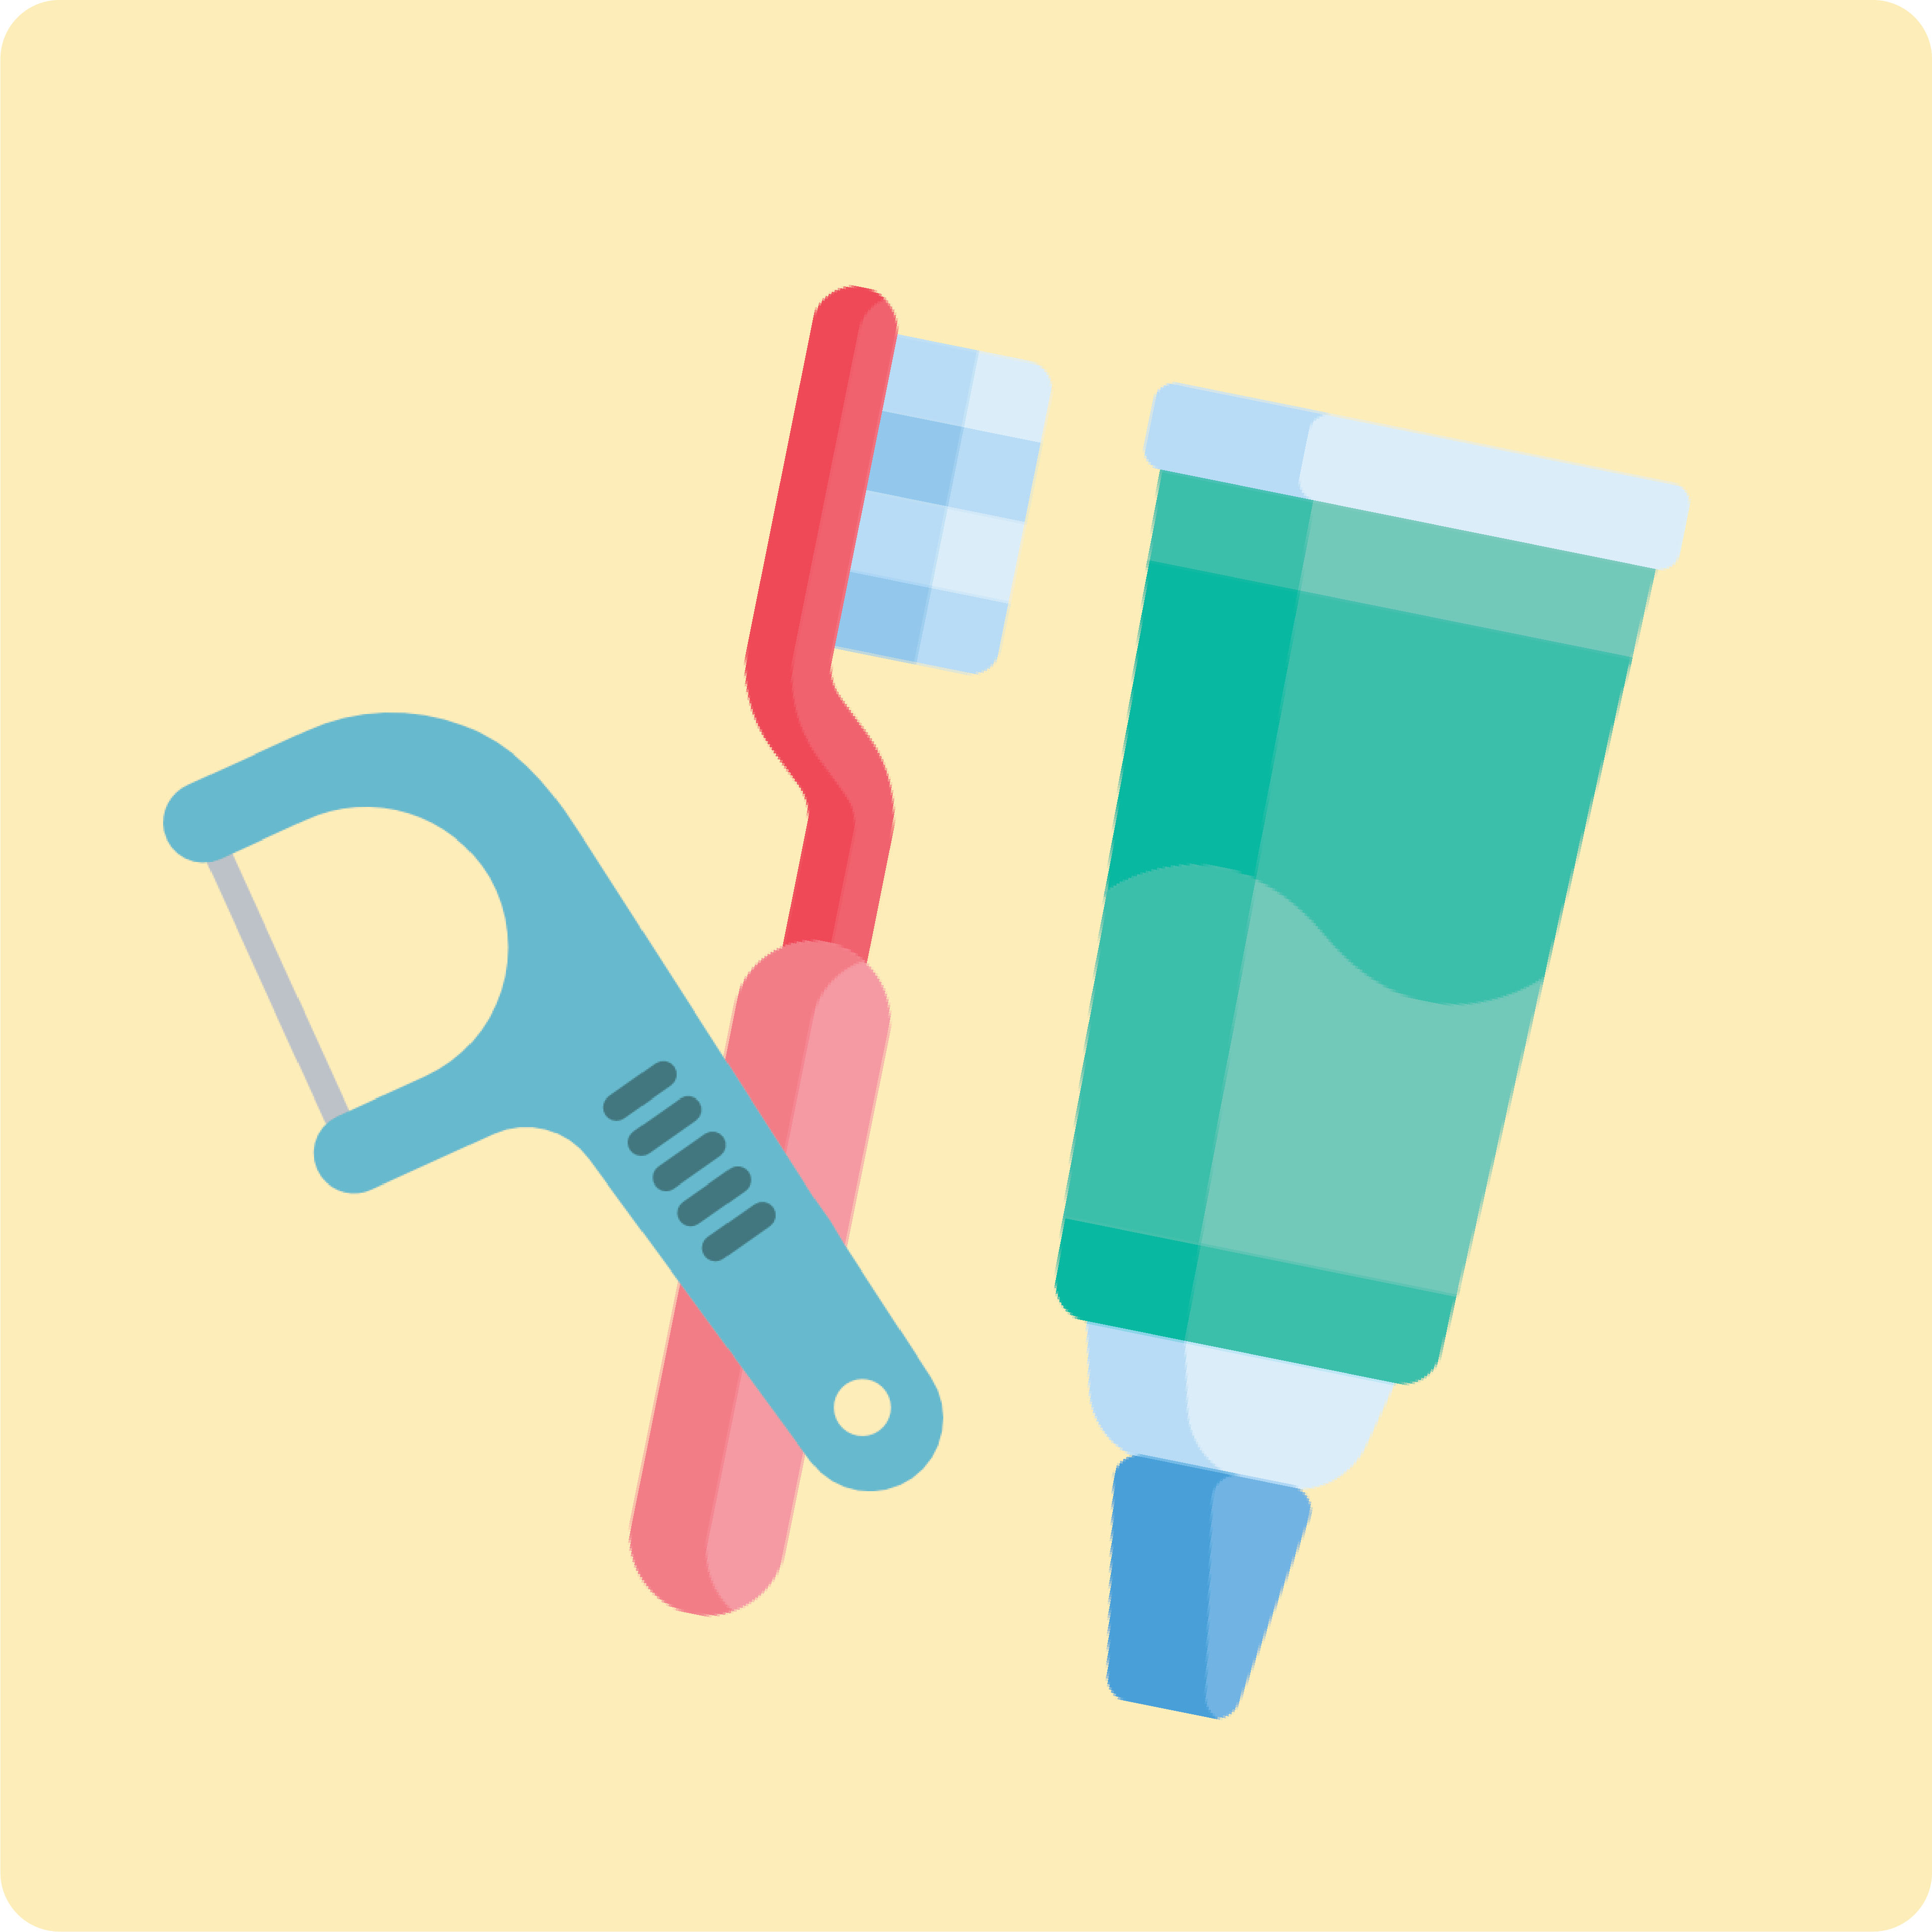 Brushing & Flossing Are Important to Your Practice, Too